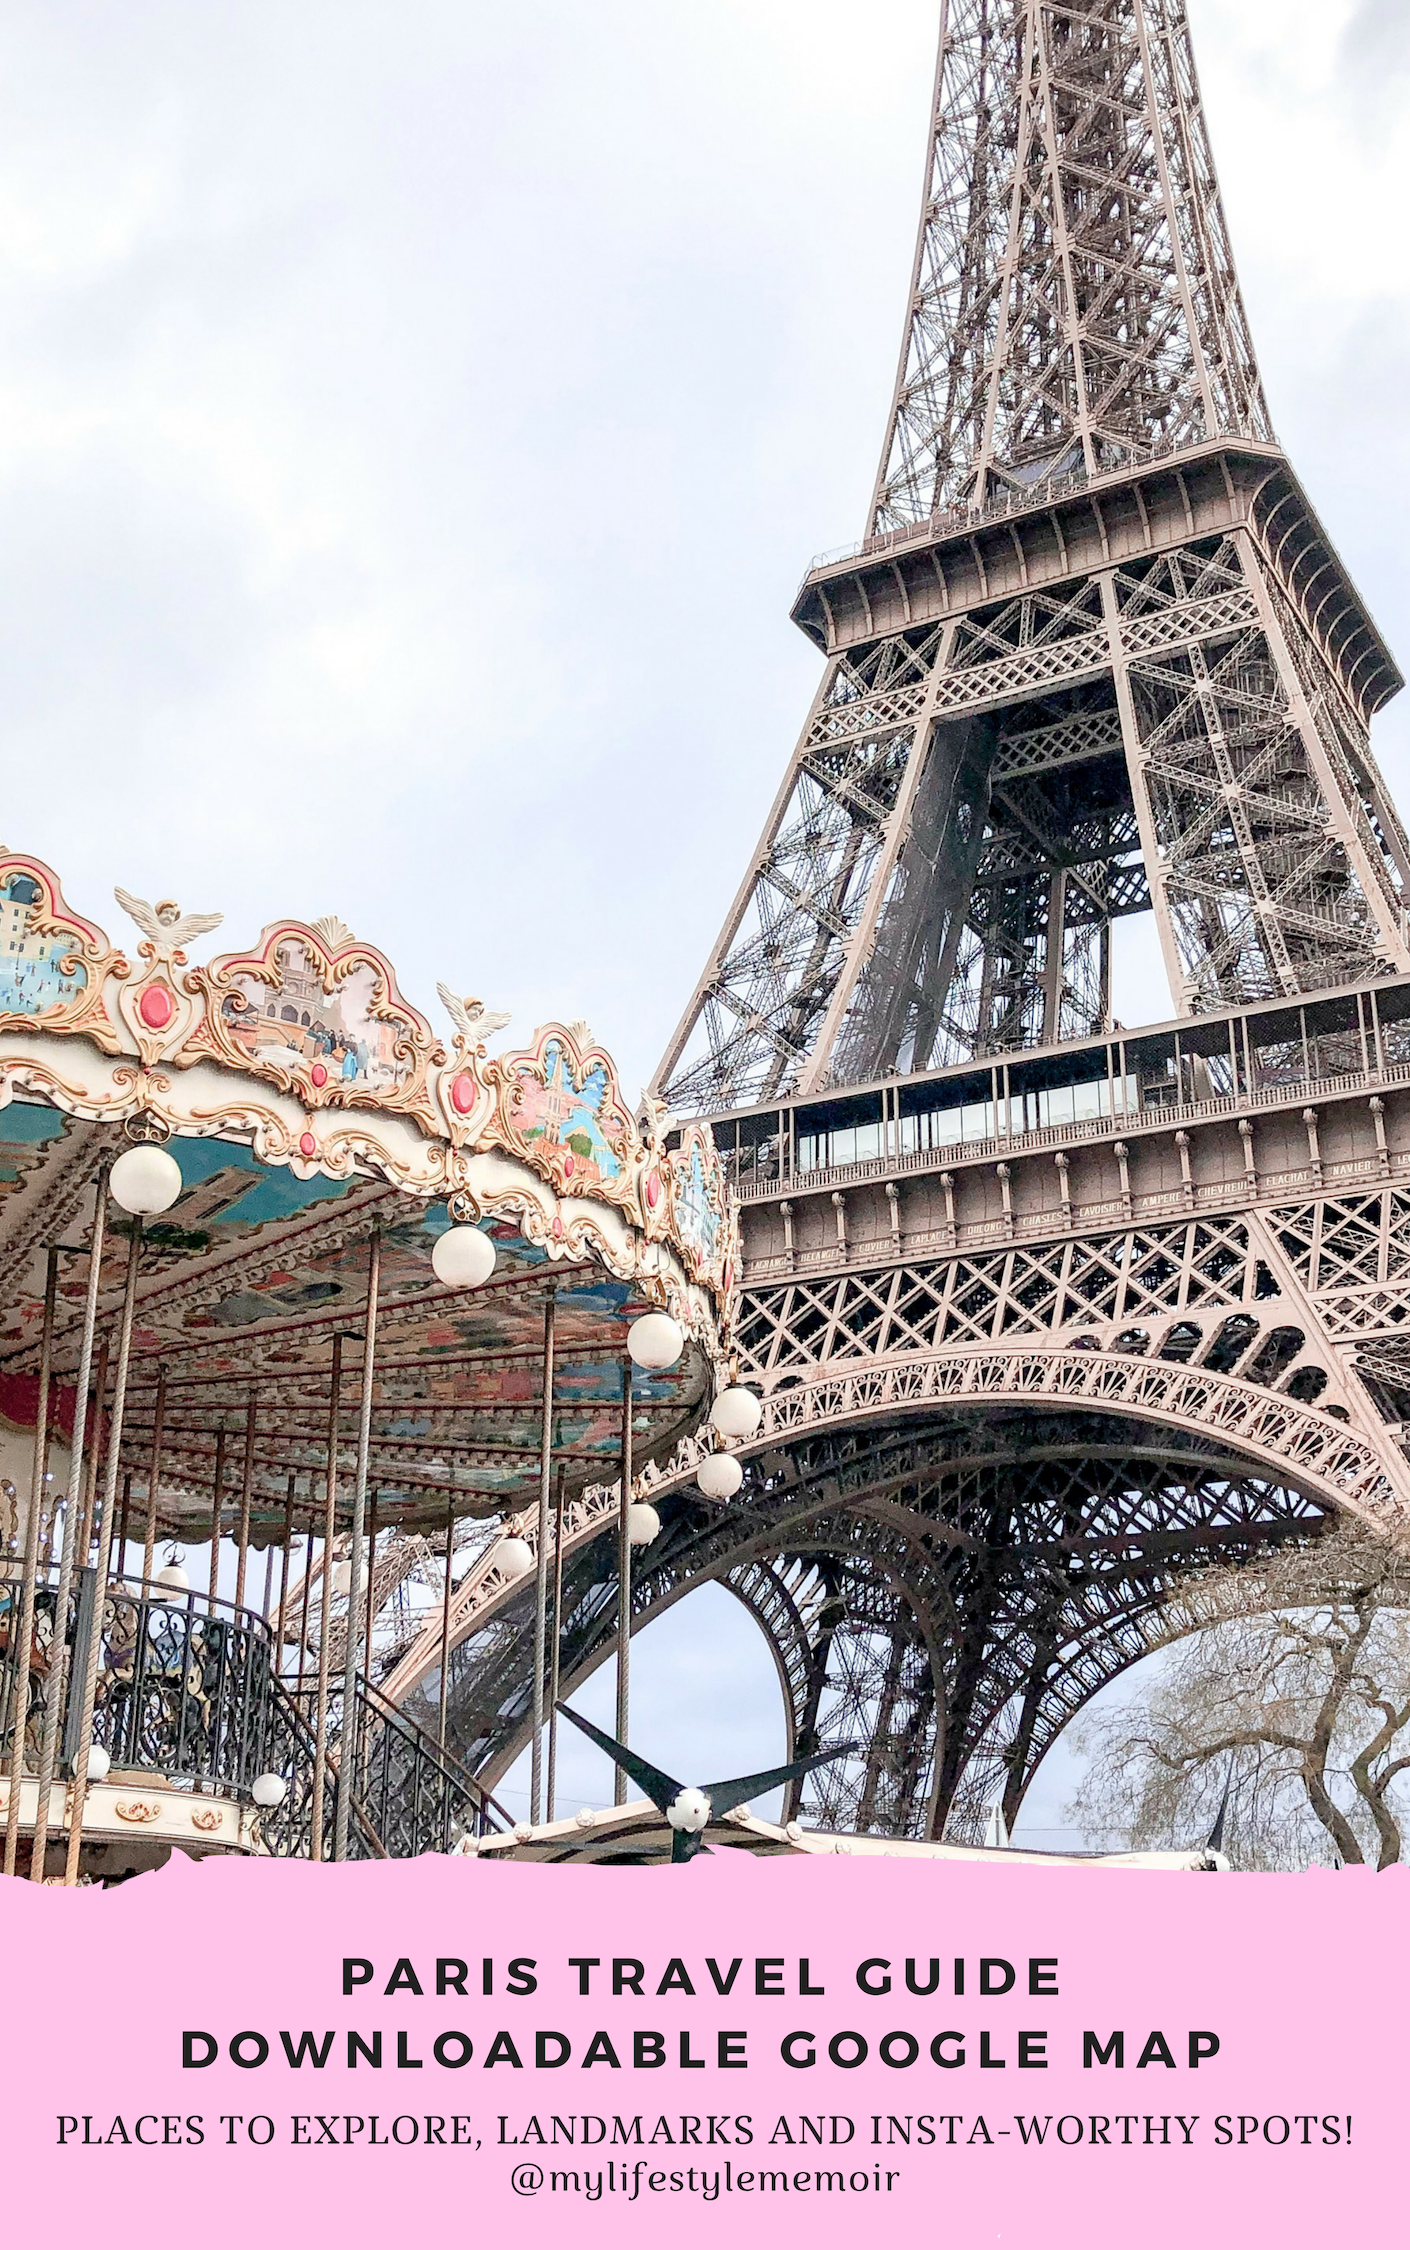 Planning a trip to Paris? This ultimate guide will show you all the landmarks and Instagram spots of Paris. Featuring a downloadable map showcasing it all! #travel #paris #france #Instagrammable #ParisGuide #travelguide